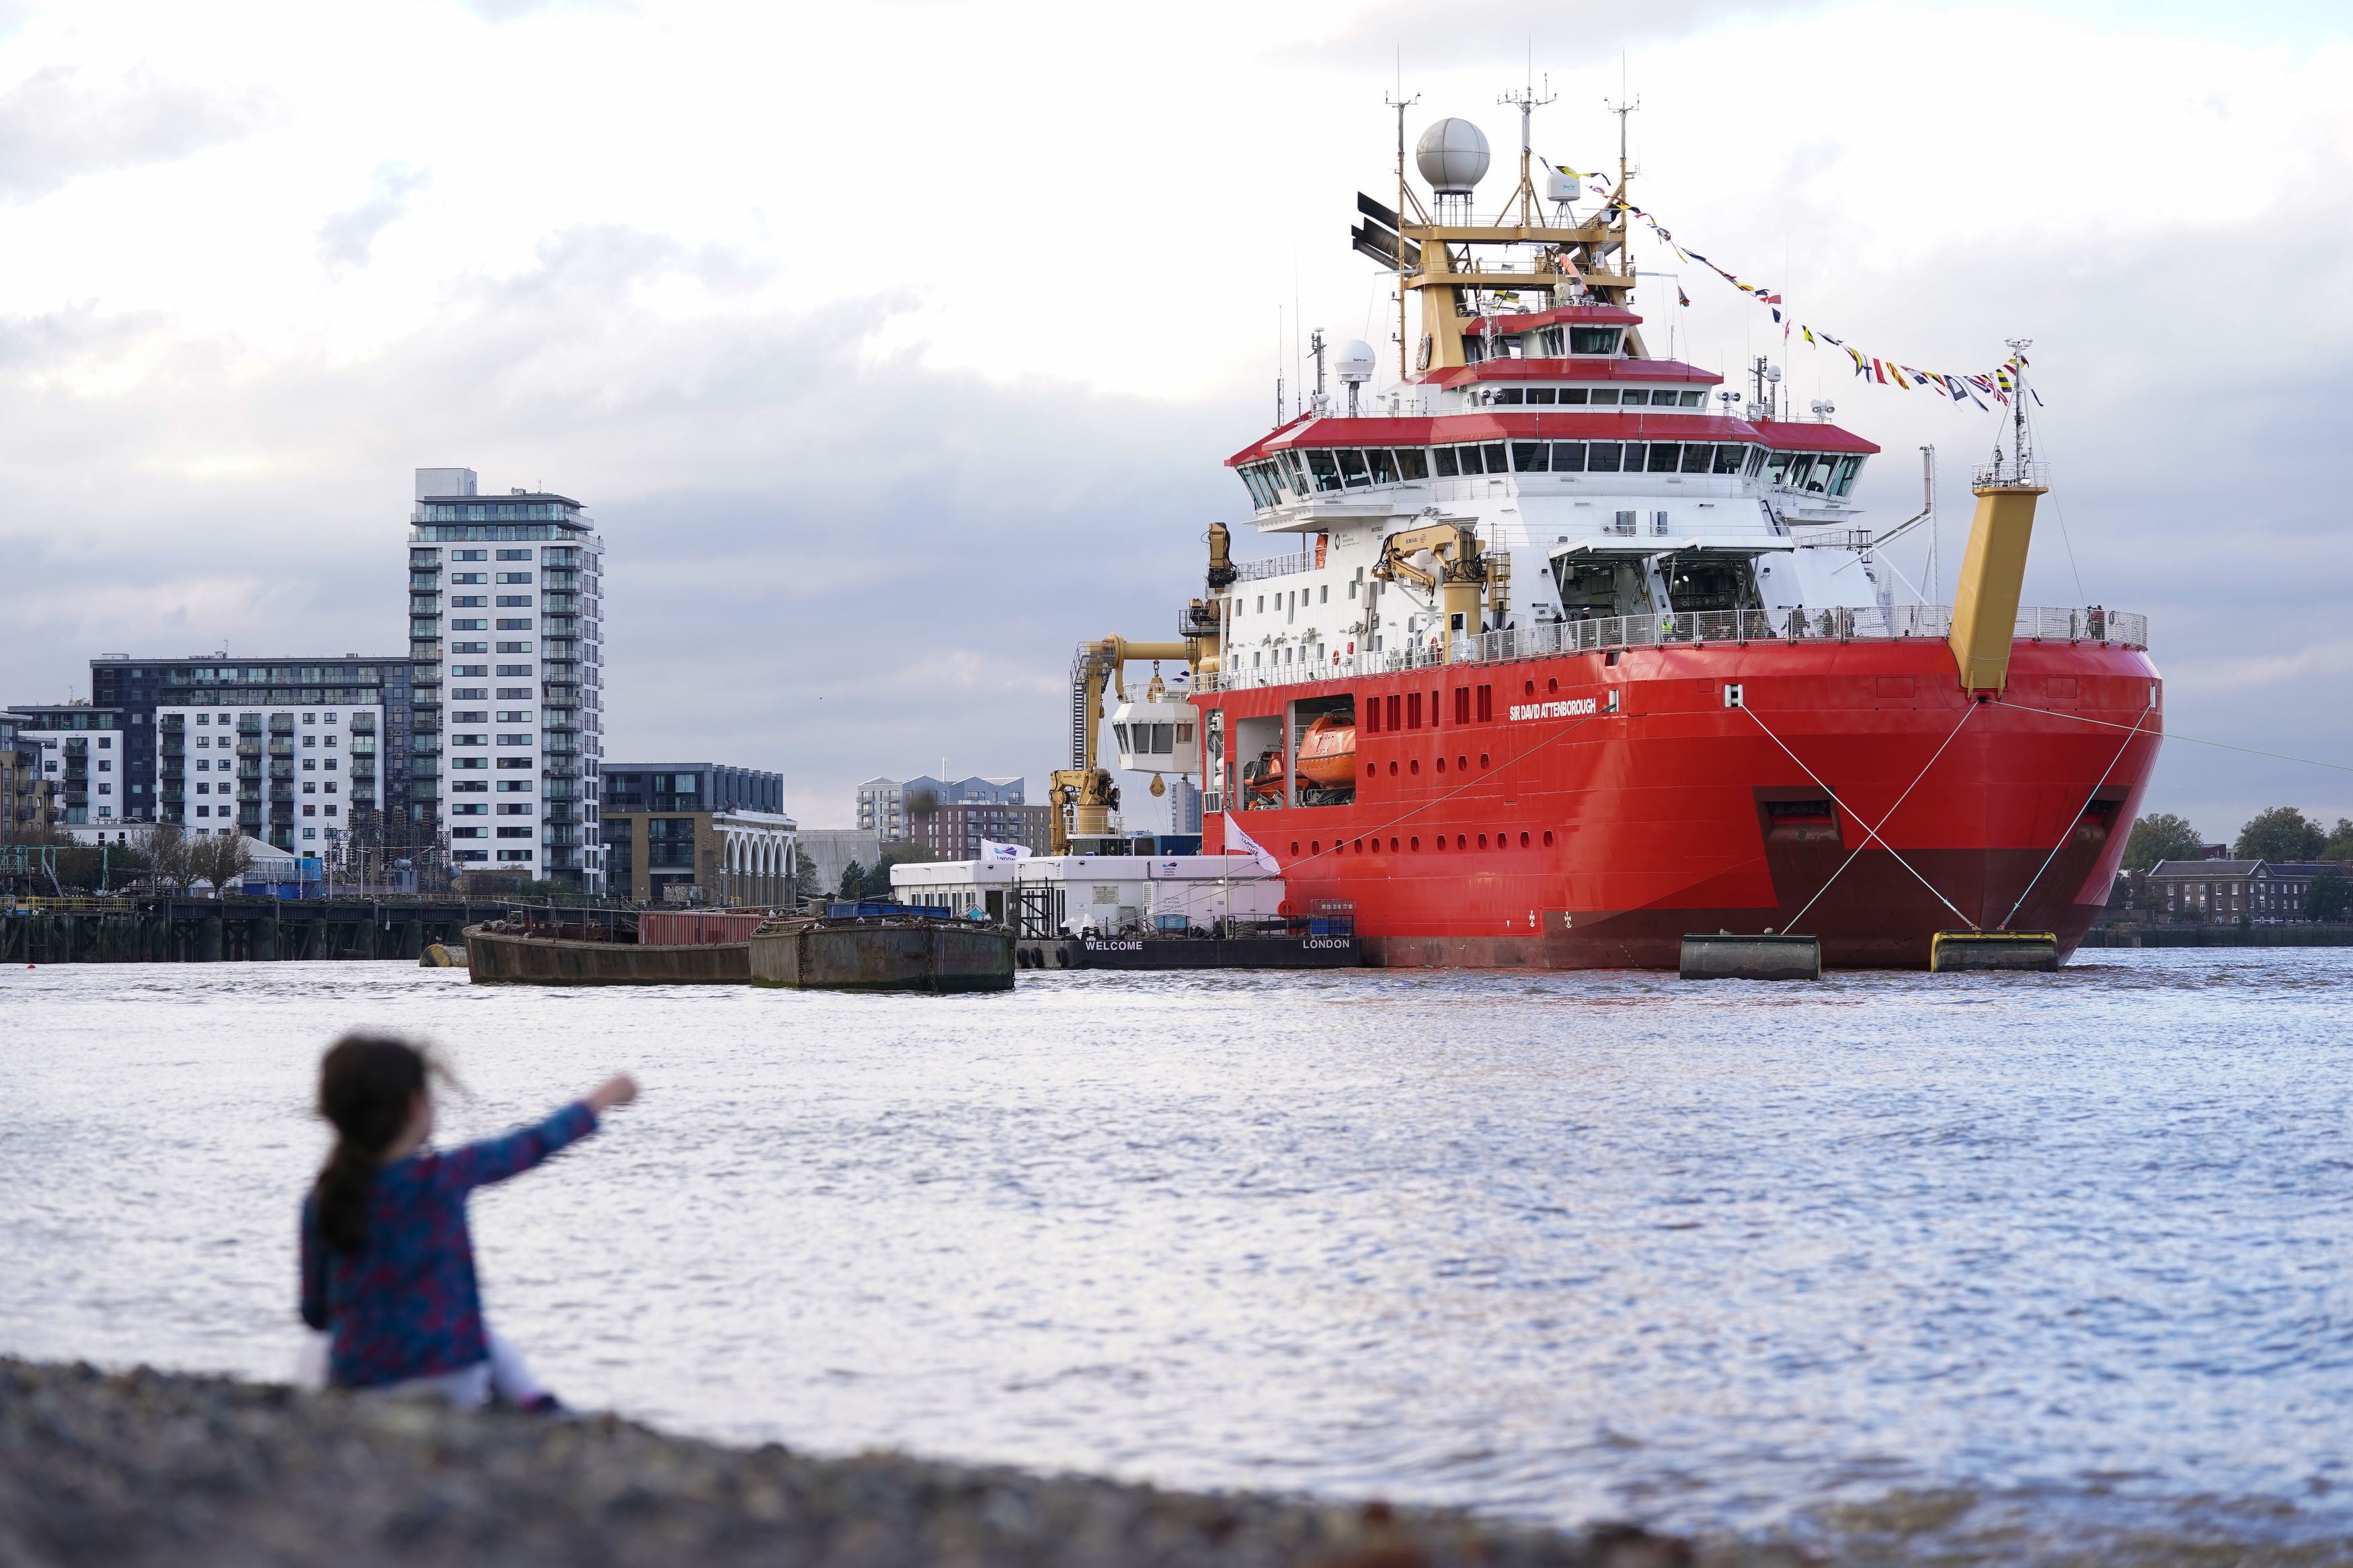 The RRS Sir David Attenborough arrived in Greenwich, southeast London, on Thursday